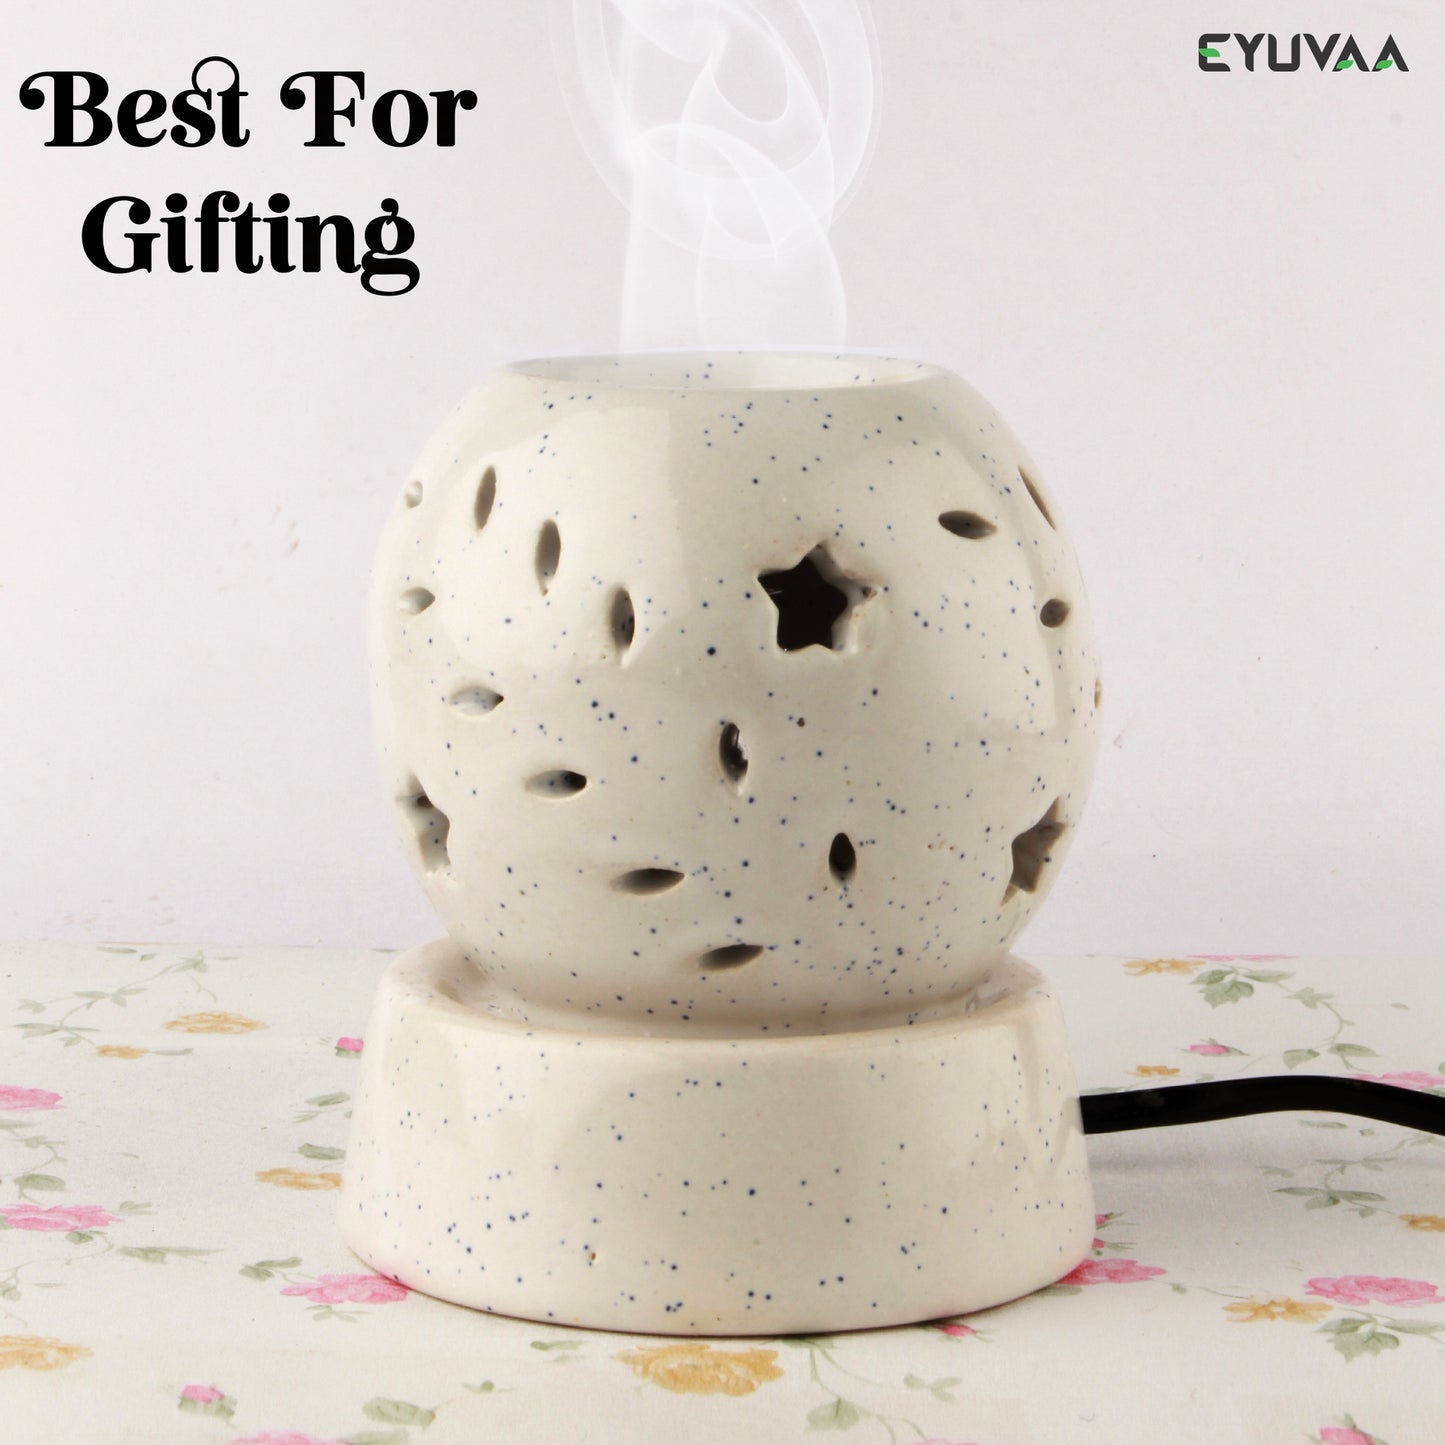 Star-Shaped Electric Aroma Diffuser for Home Fragrance, Night Lamp, Aromatherapy Ceramic Diffuser|Diffuser Set for Room Fragrance with 10ml Essential Oil